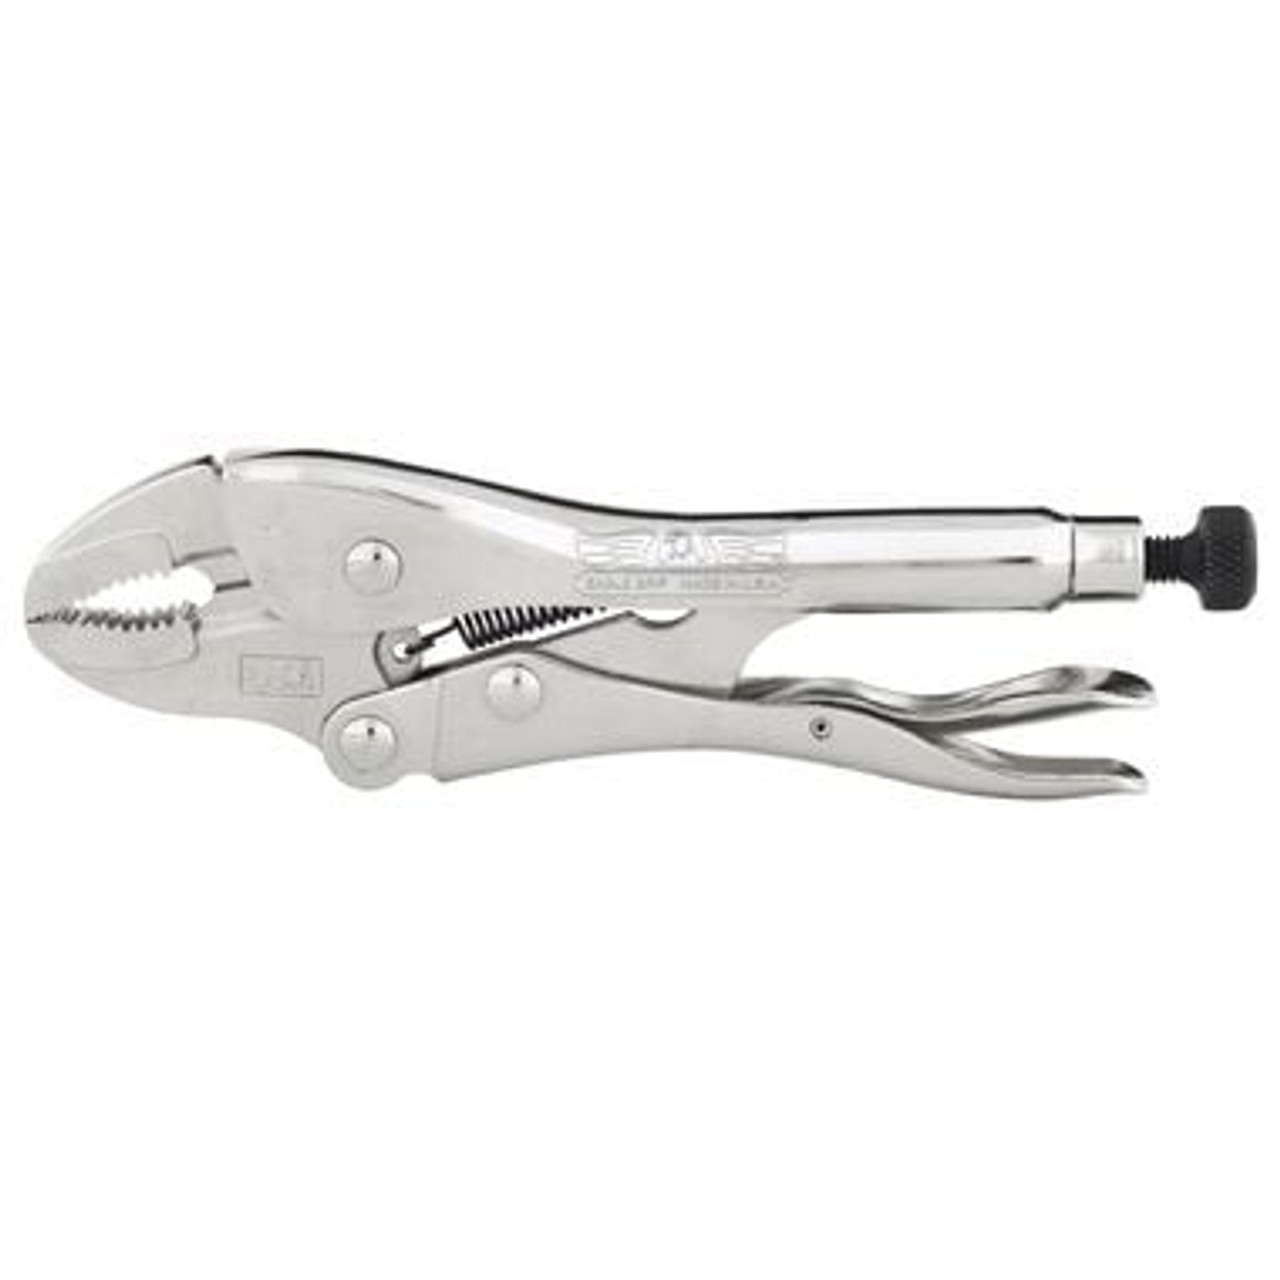 Malco Eagle Grip Locking Pliers and Clamps Review - Pro Tool Reviews